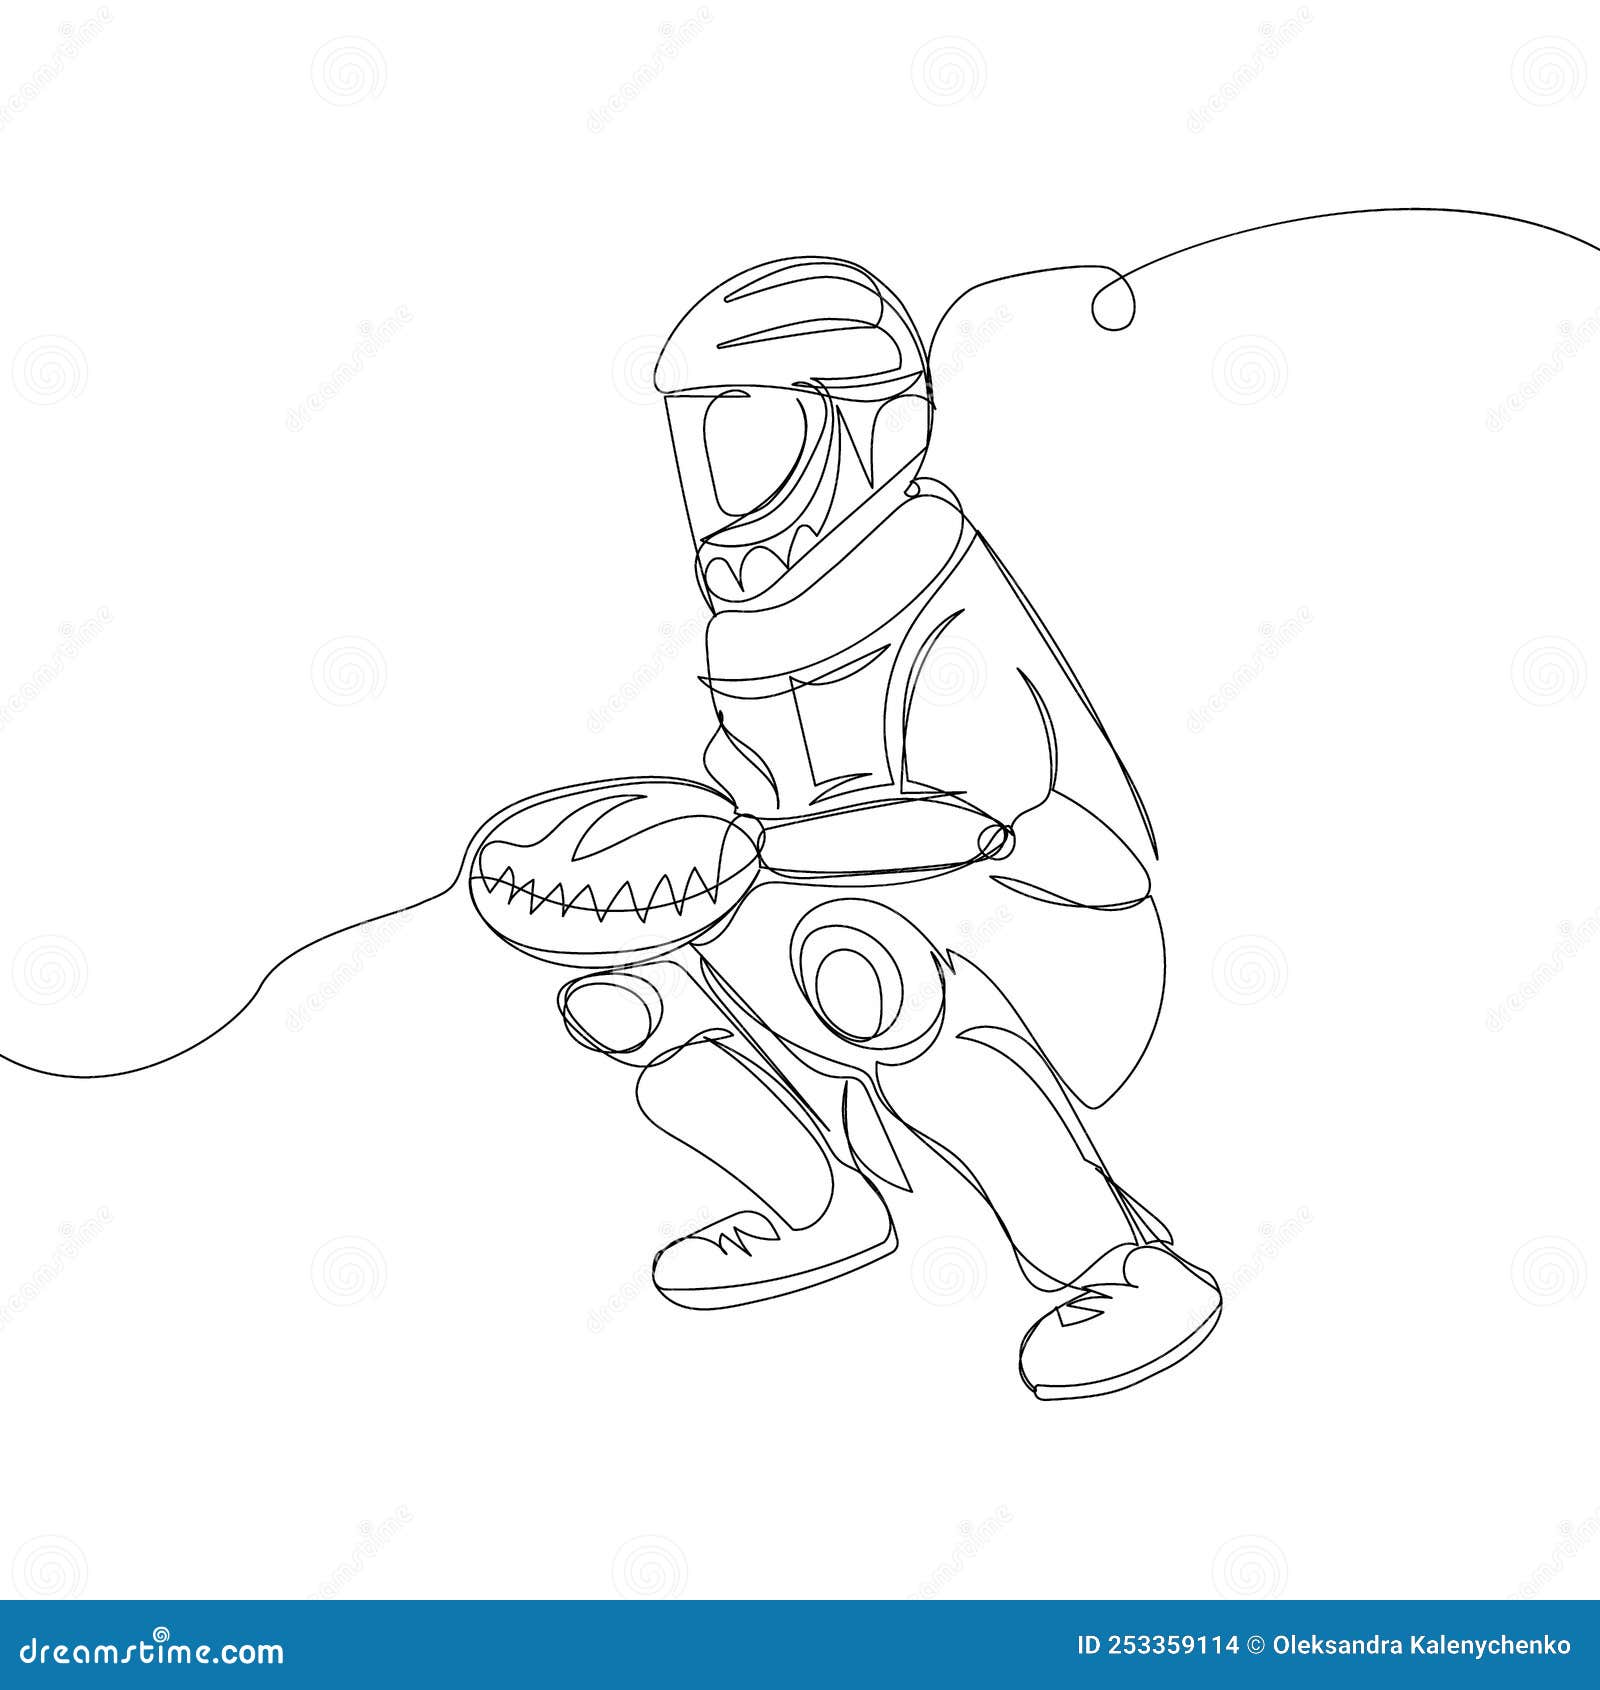 Continuous line drawing. Illustration shows a baseball player